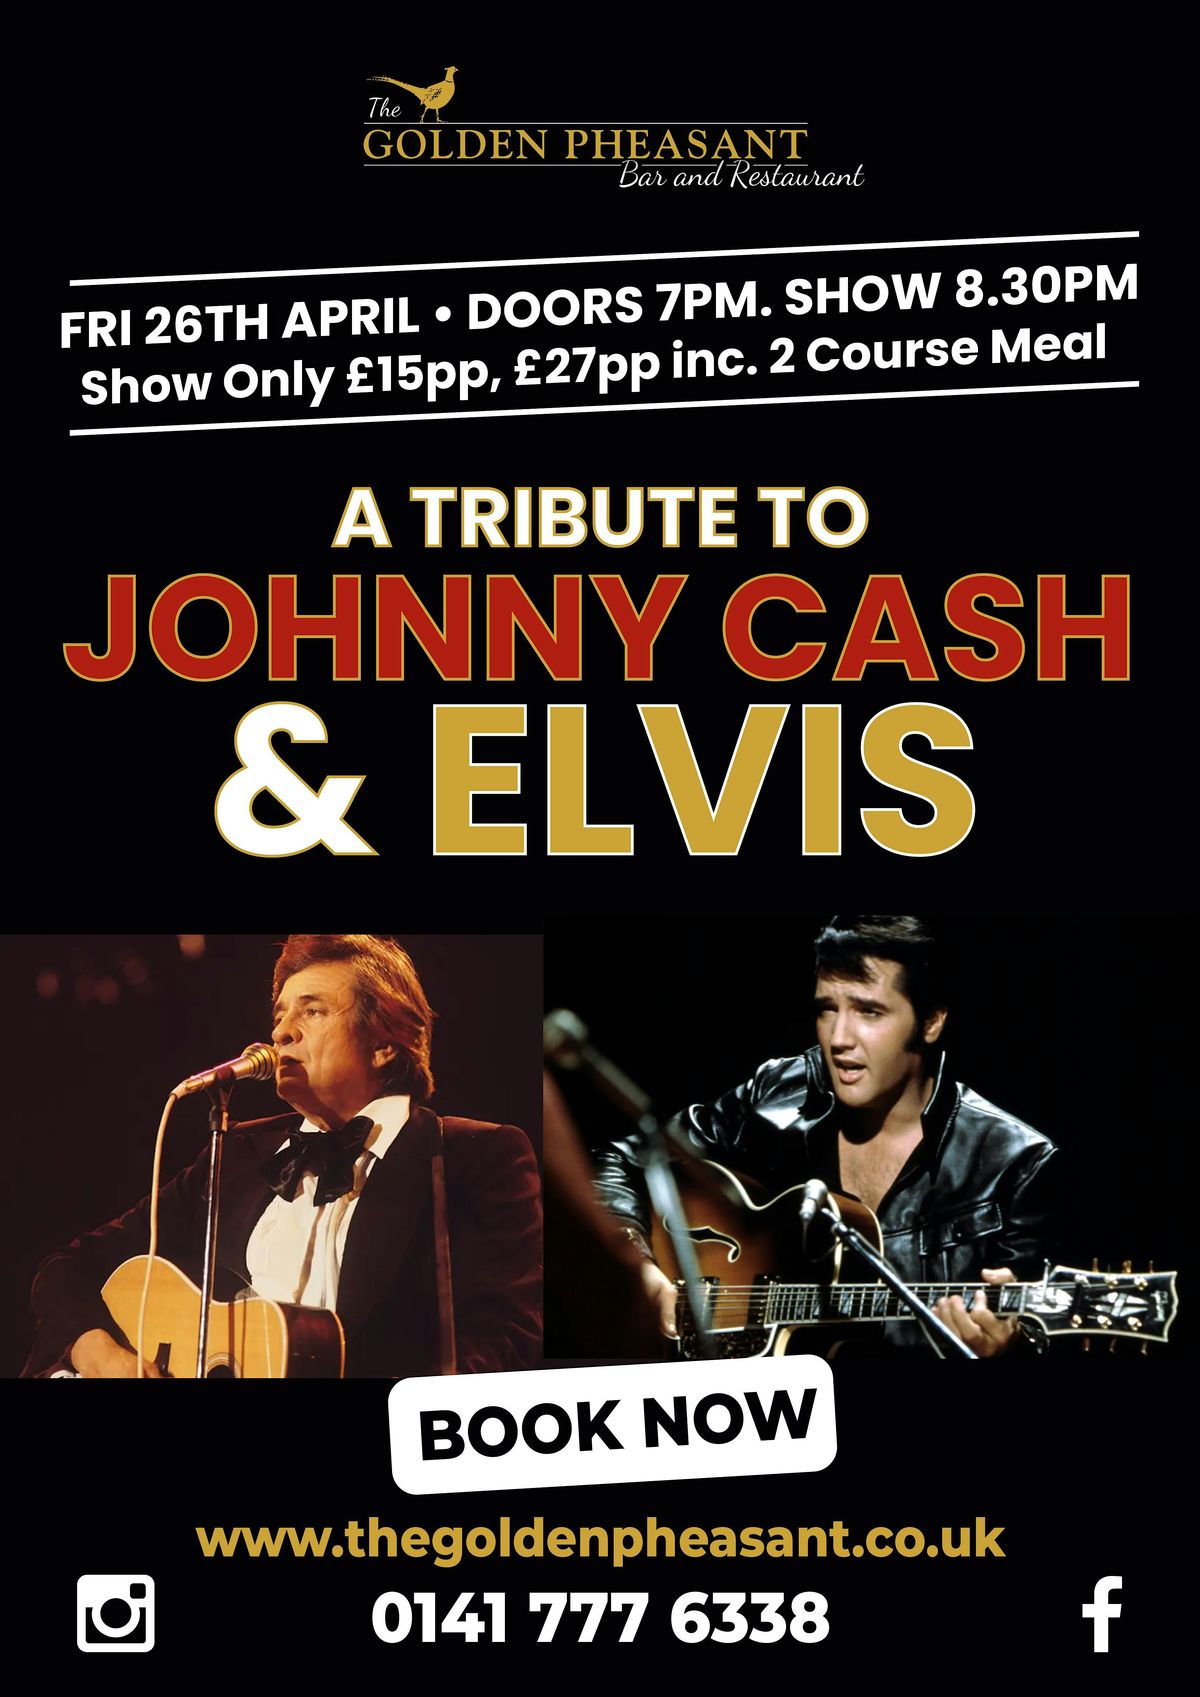 A Tribute to Johnny cash & Elvis